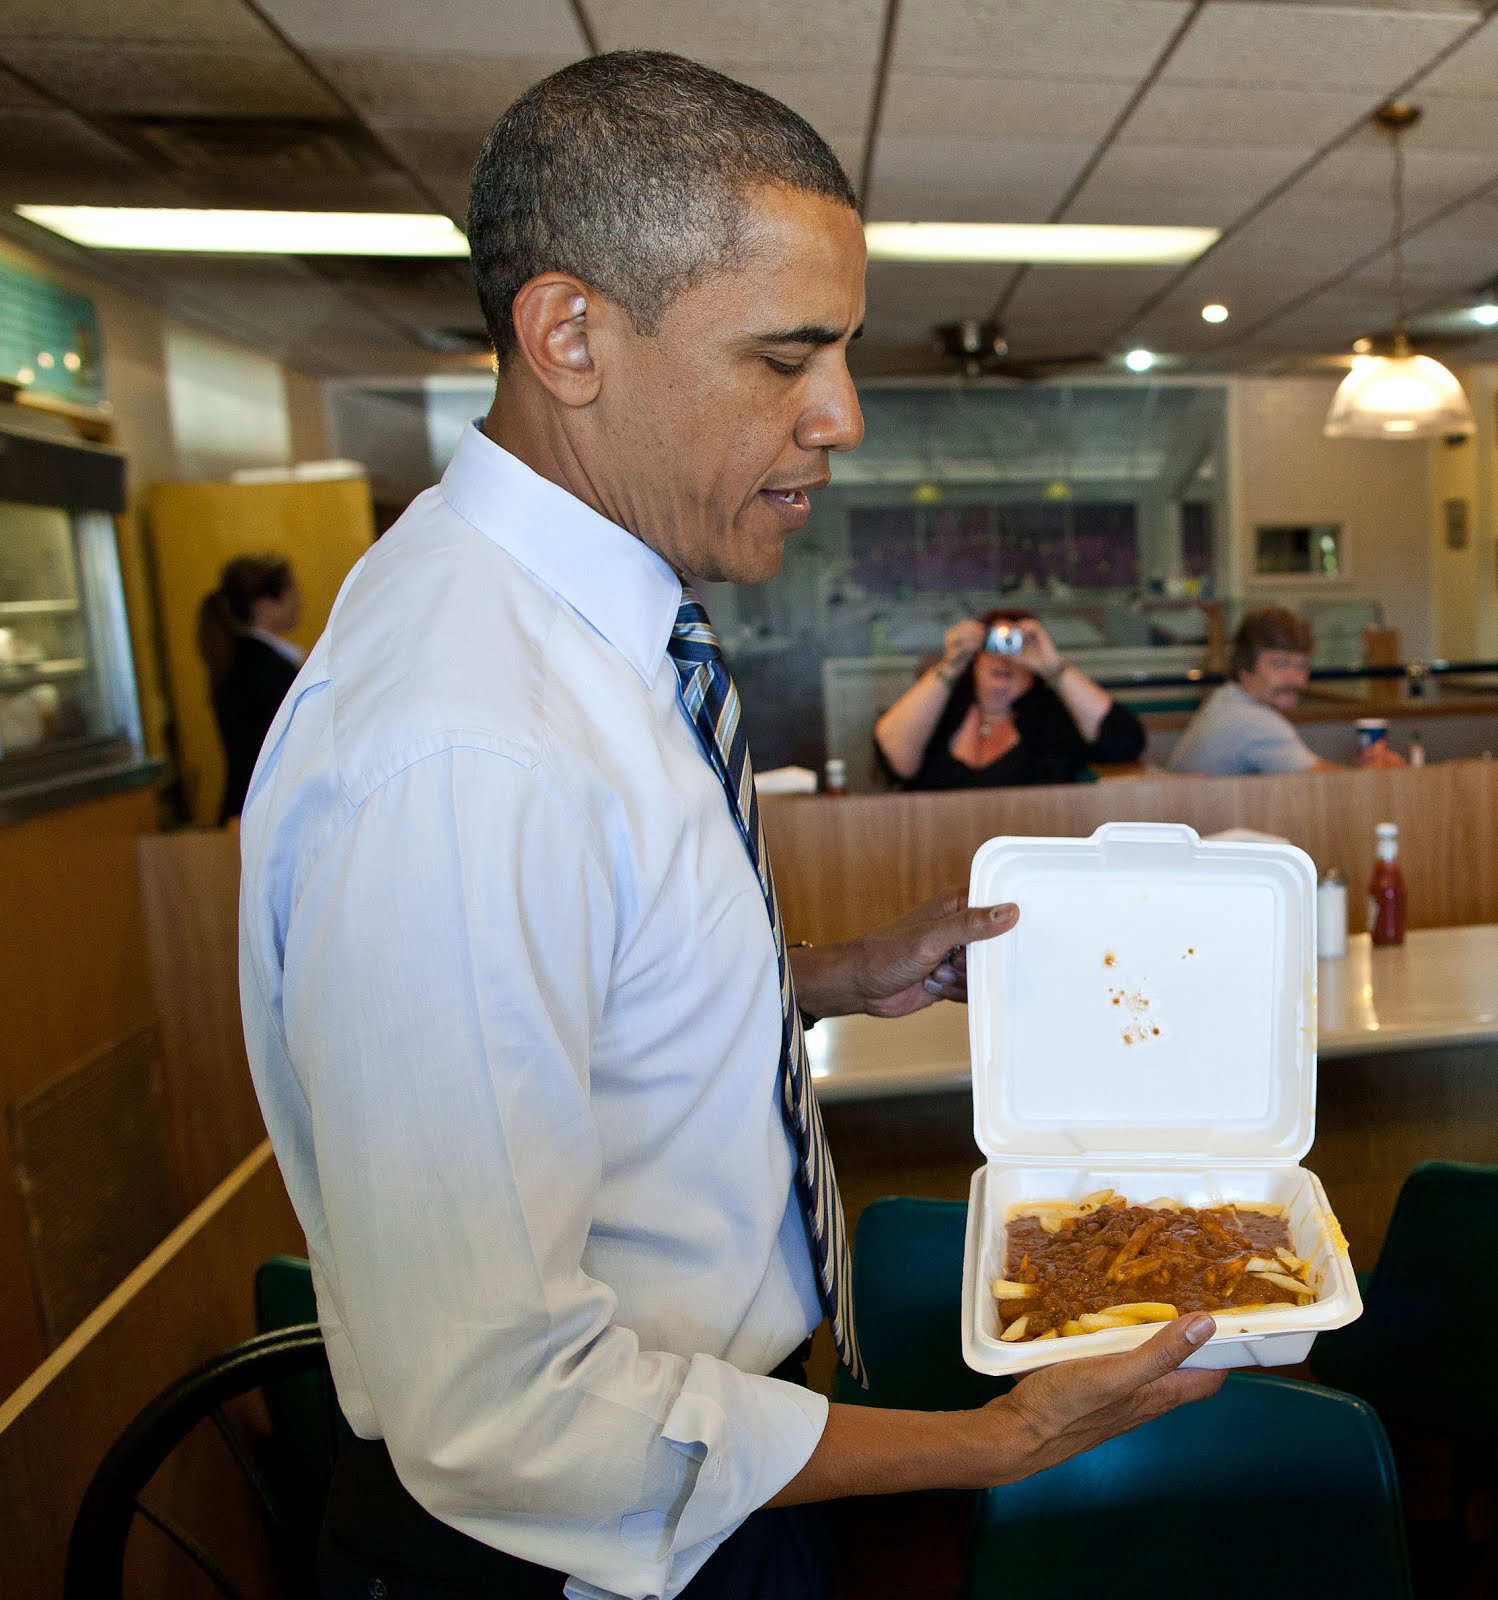 obama food orama one: Why Does The President Eat So Much ...